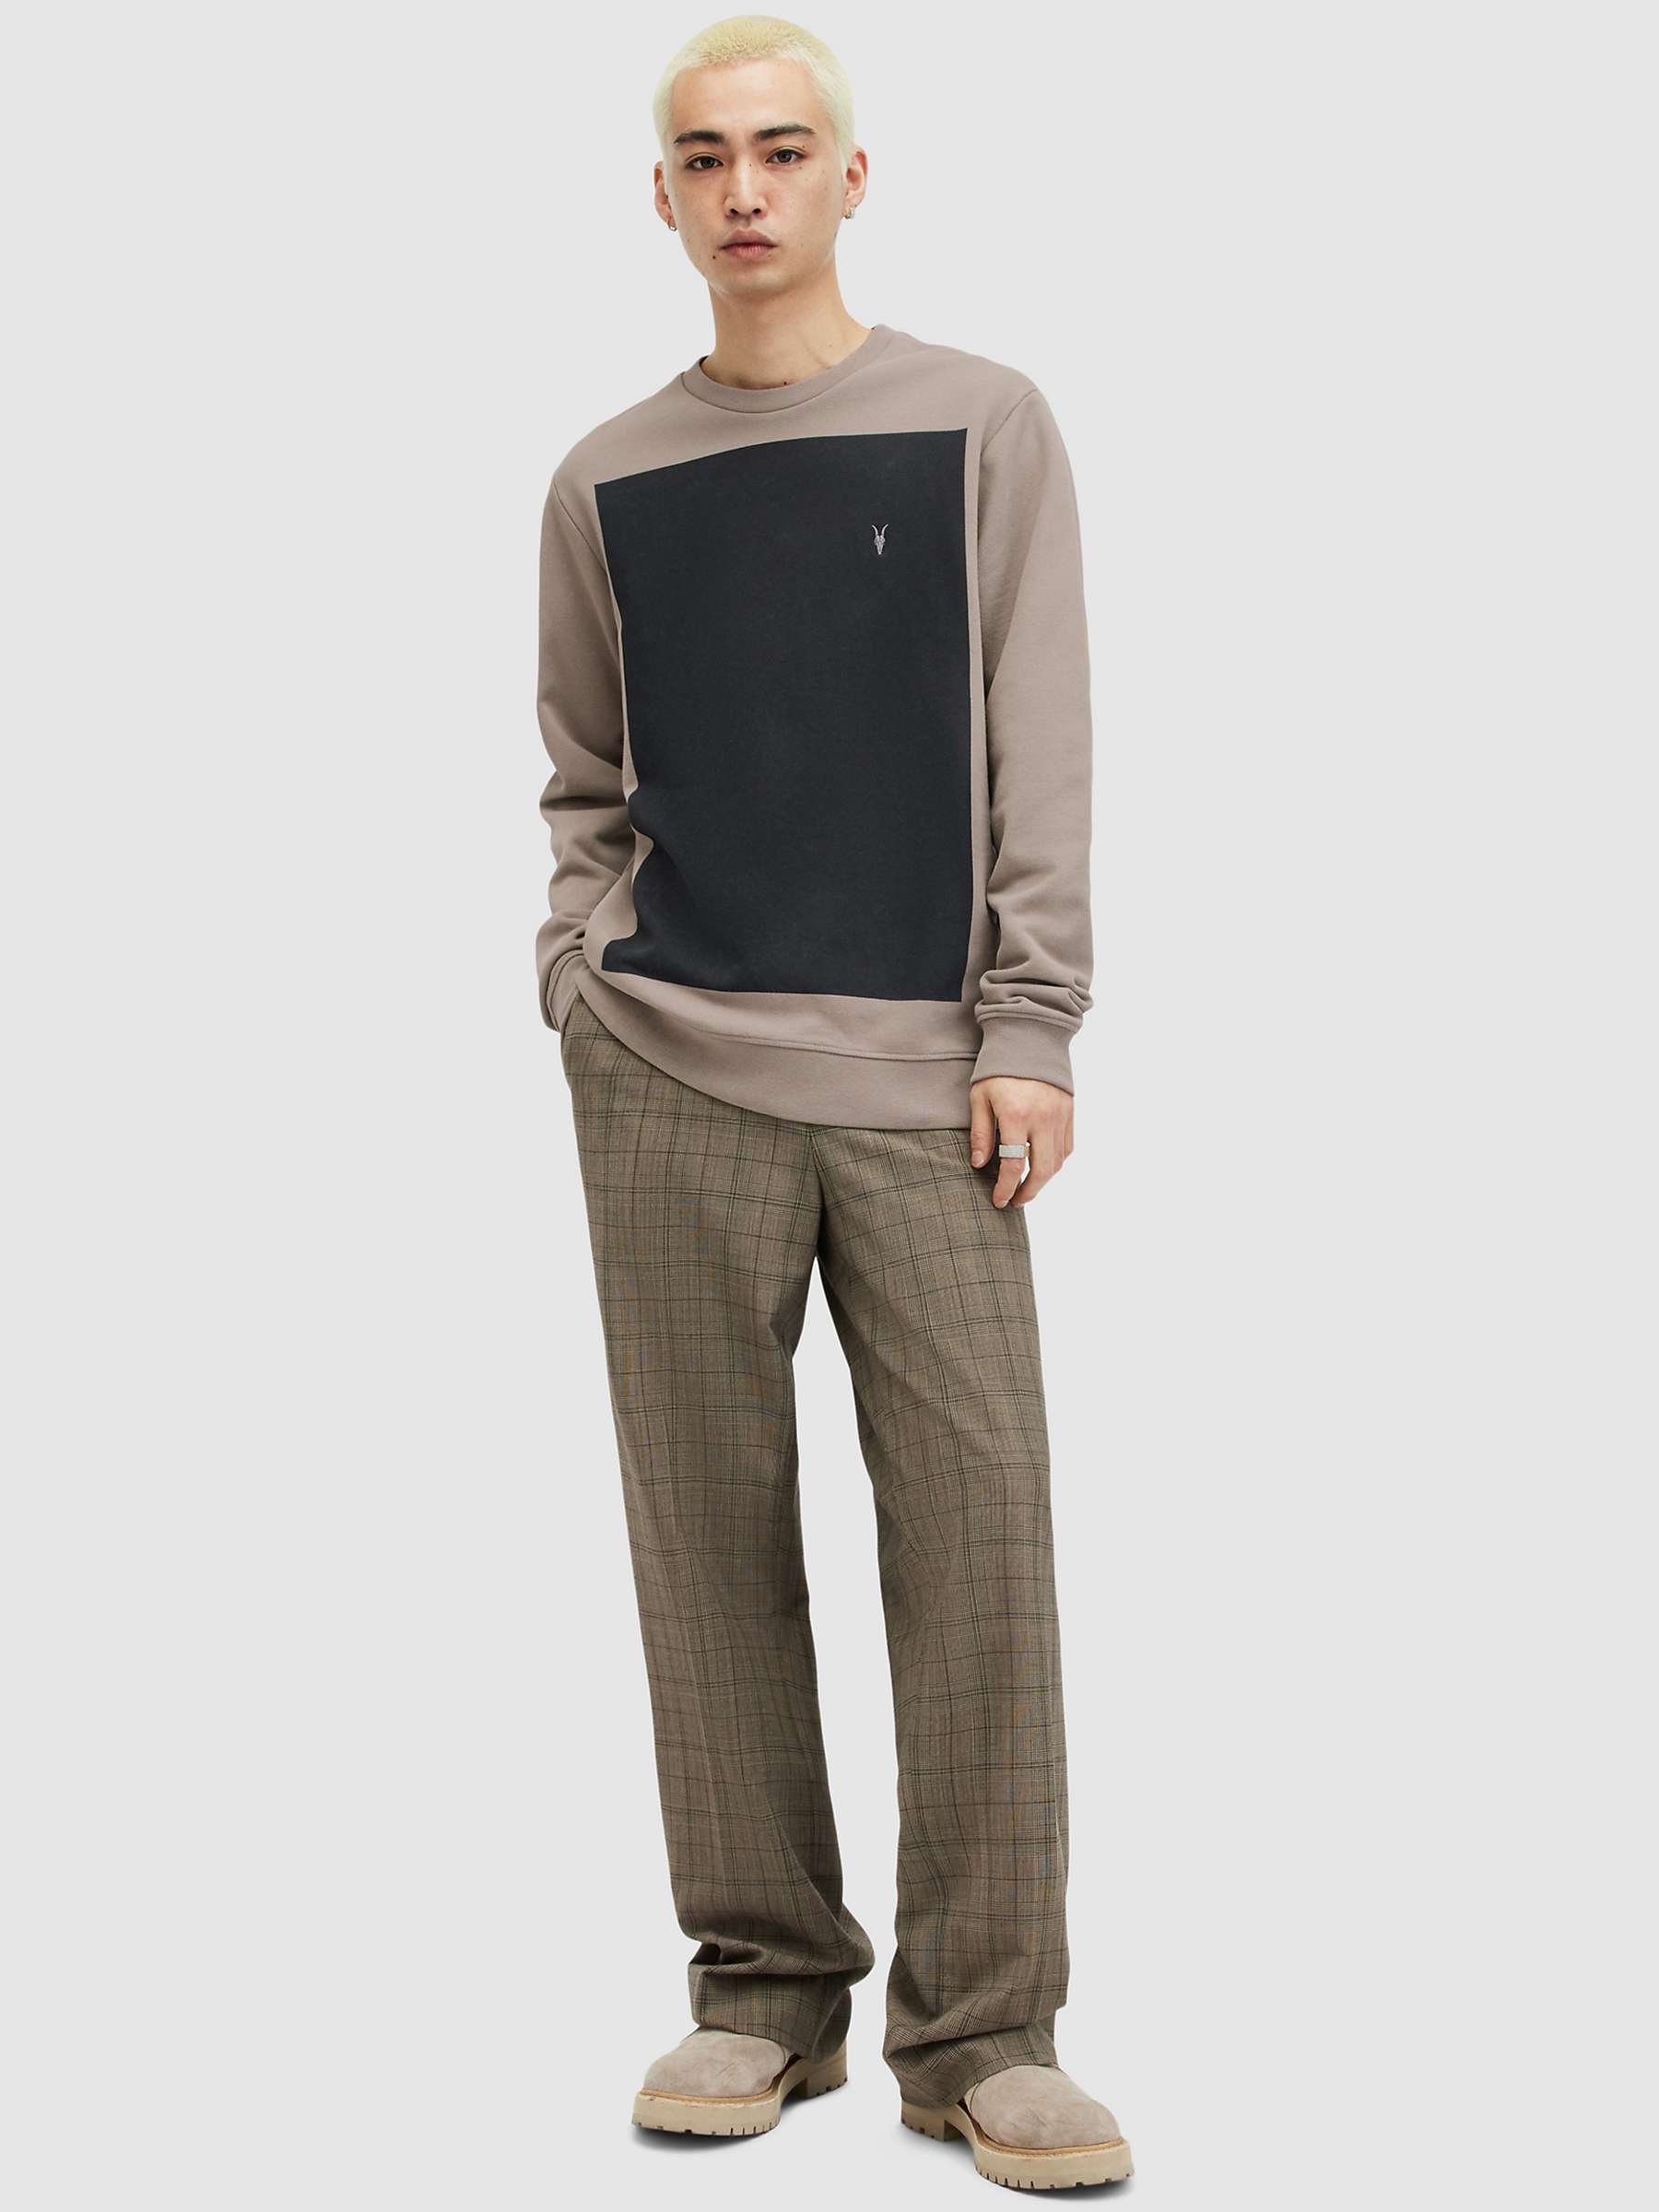 Buy AllSaints Lobke Organic Cotton Top, Chestnut Taupe Online at johnlewis.com